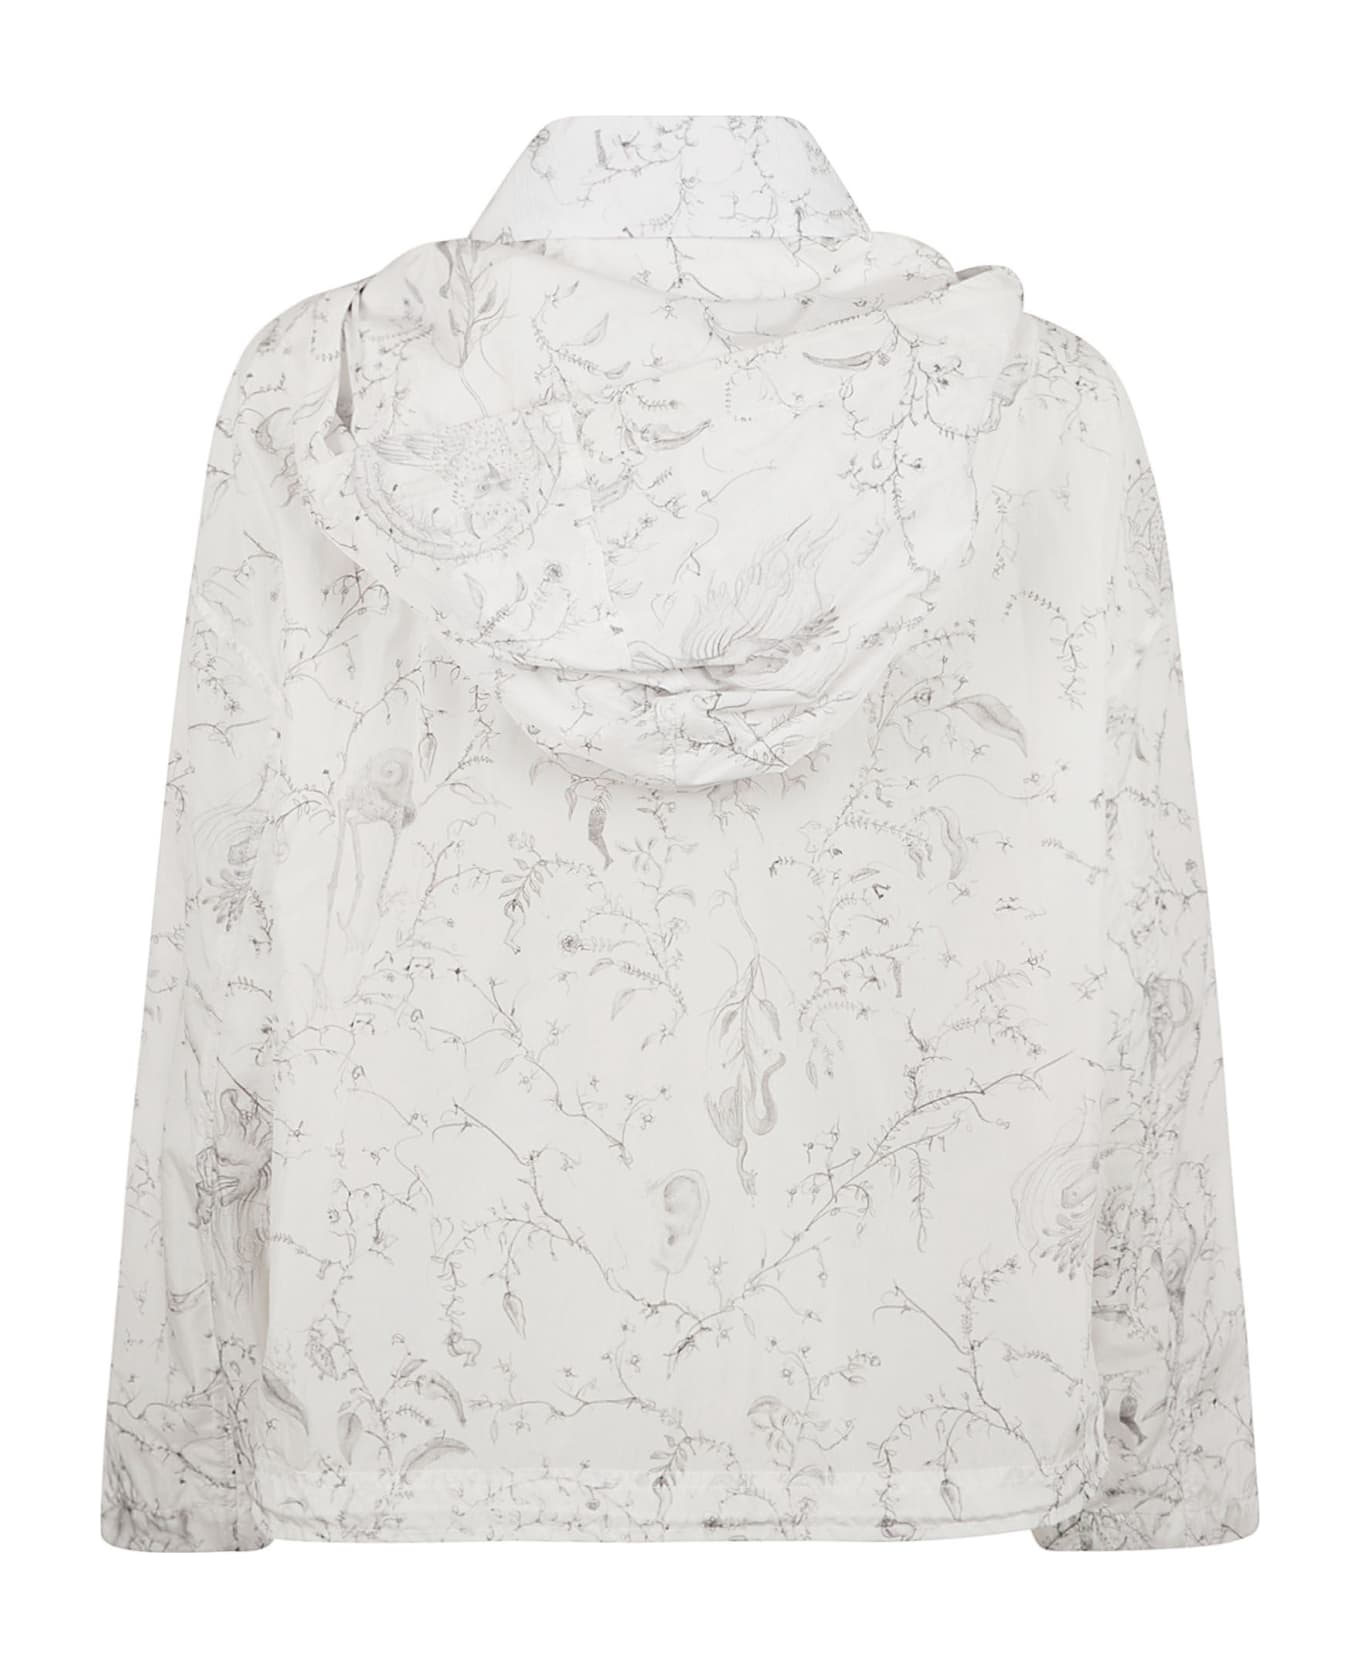 Fabiana Filippi Printed All-over Shirt - ONLY ONE COLOR